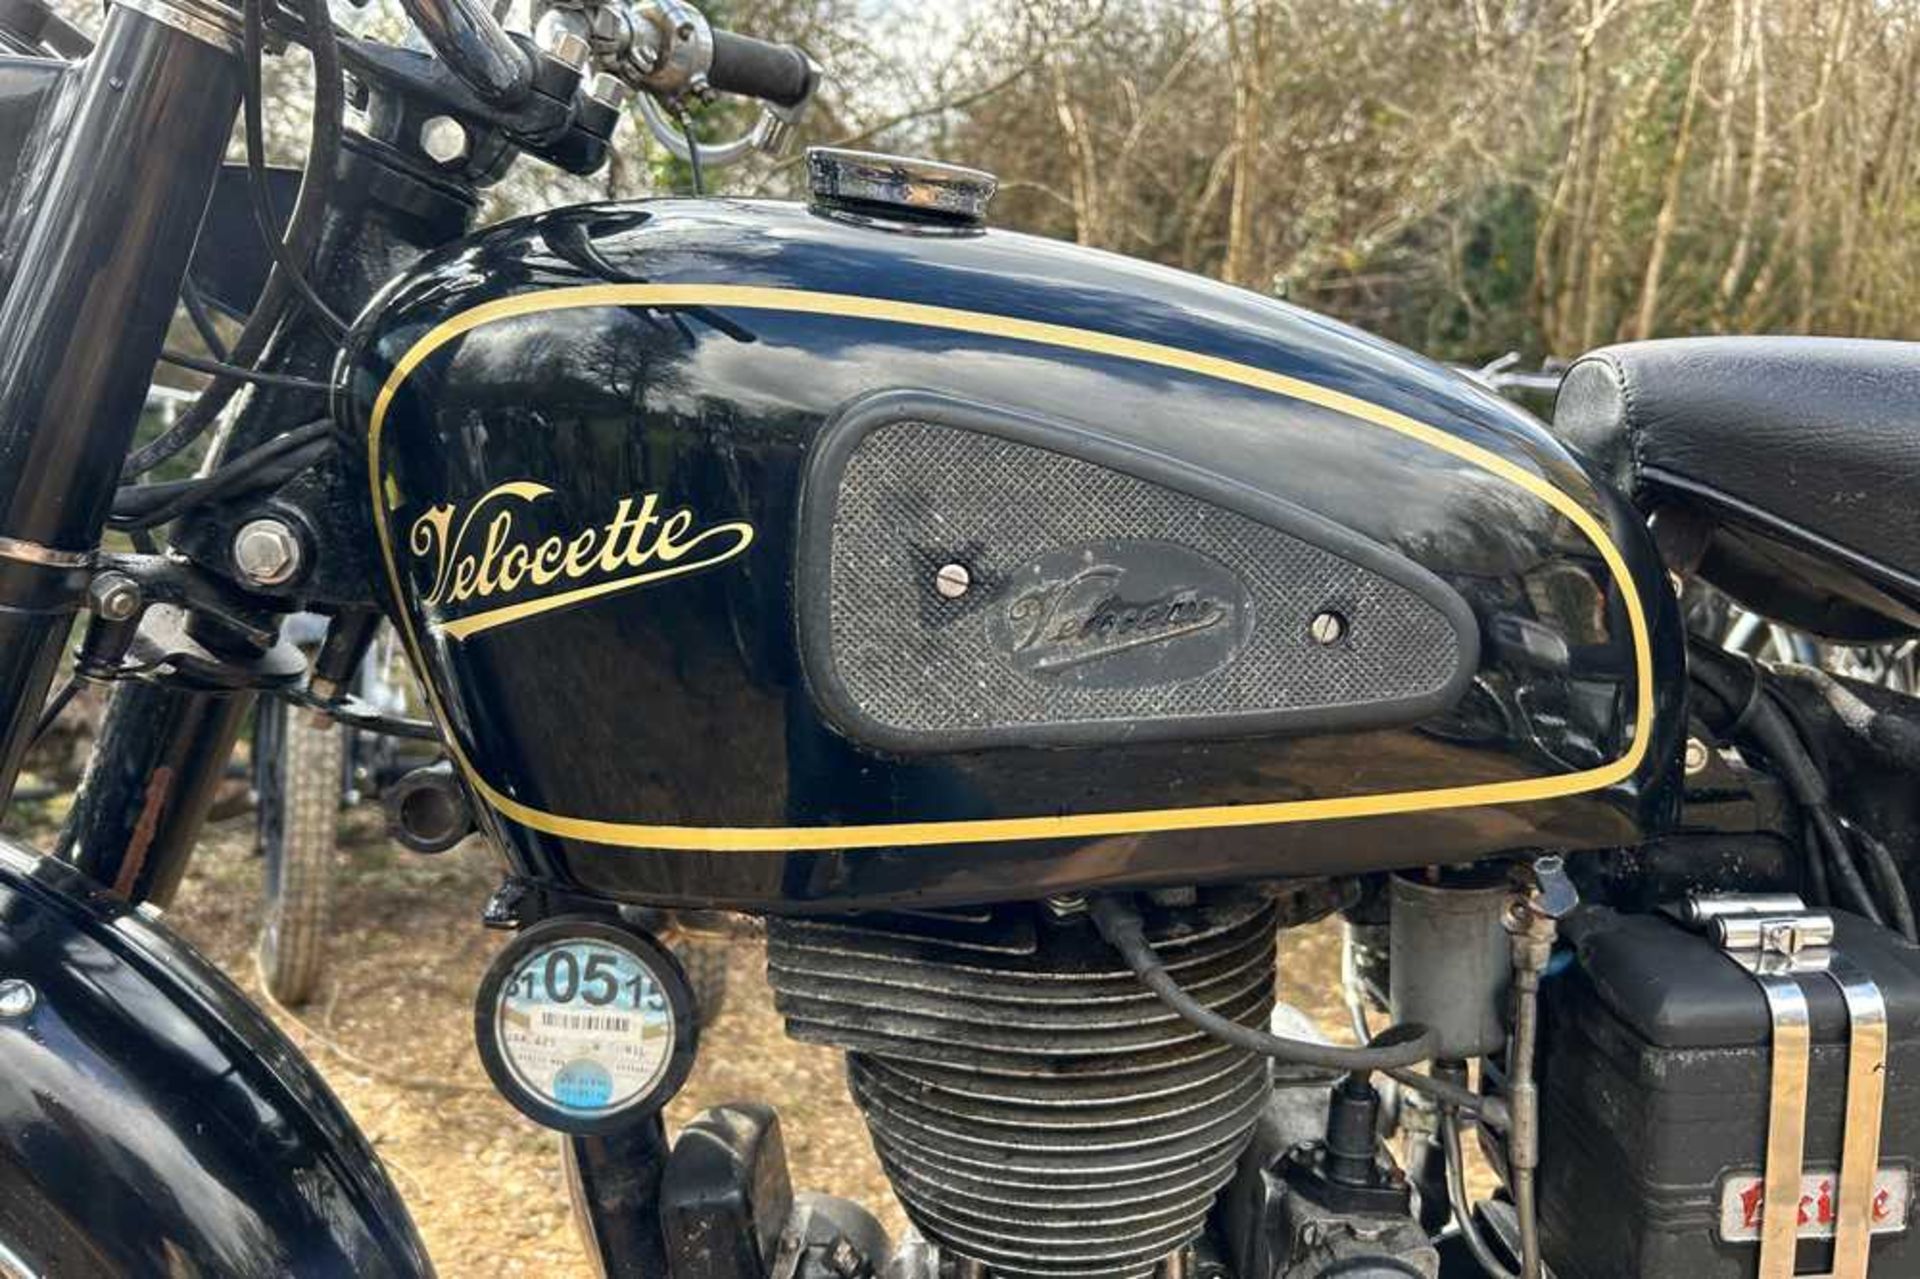 1954 Velocette MSS No Reserve - Image 32 of 51